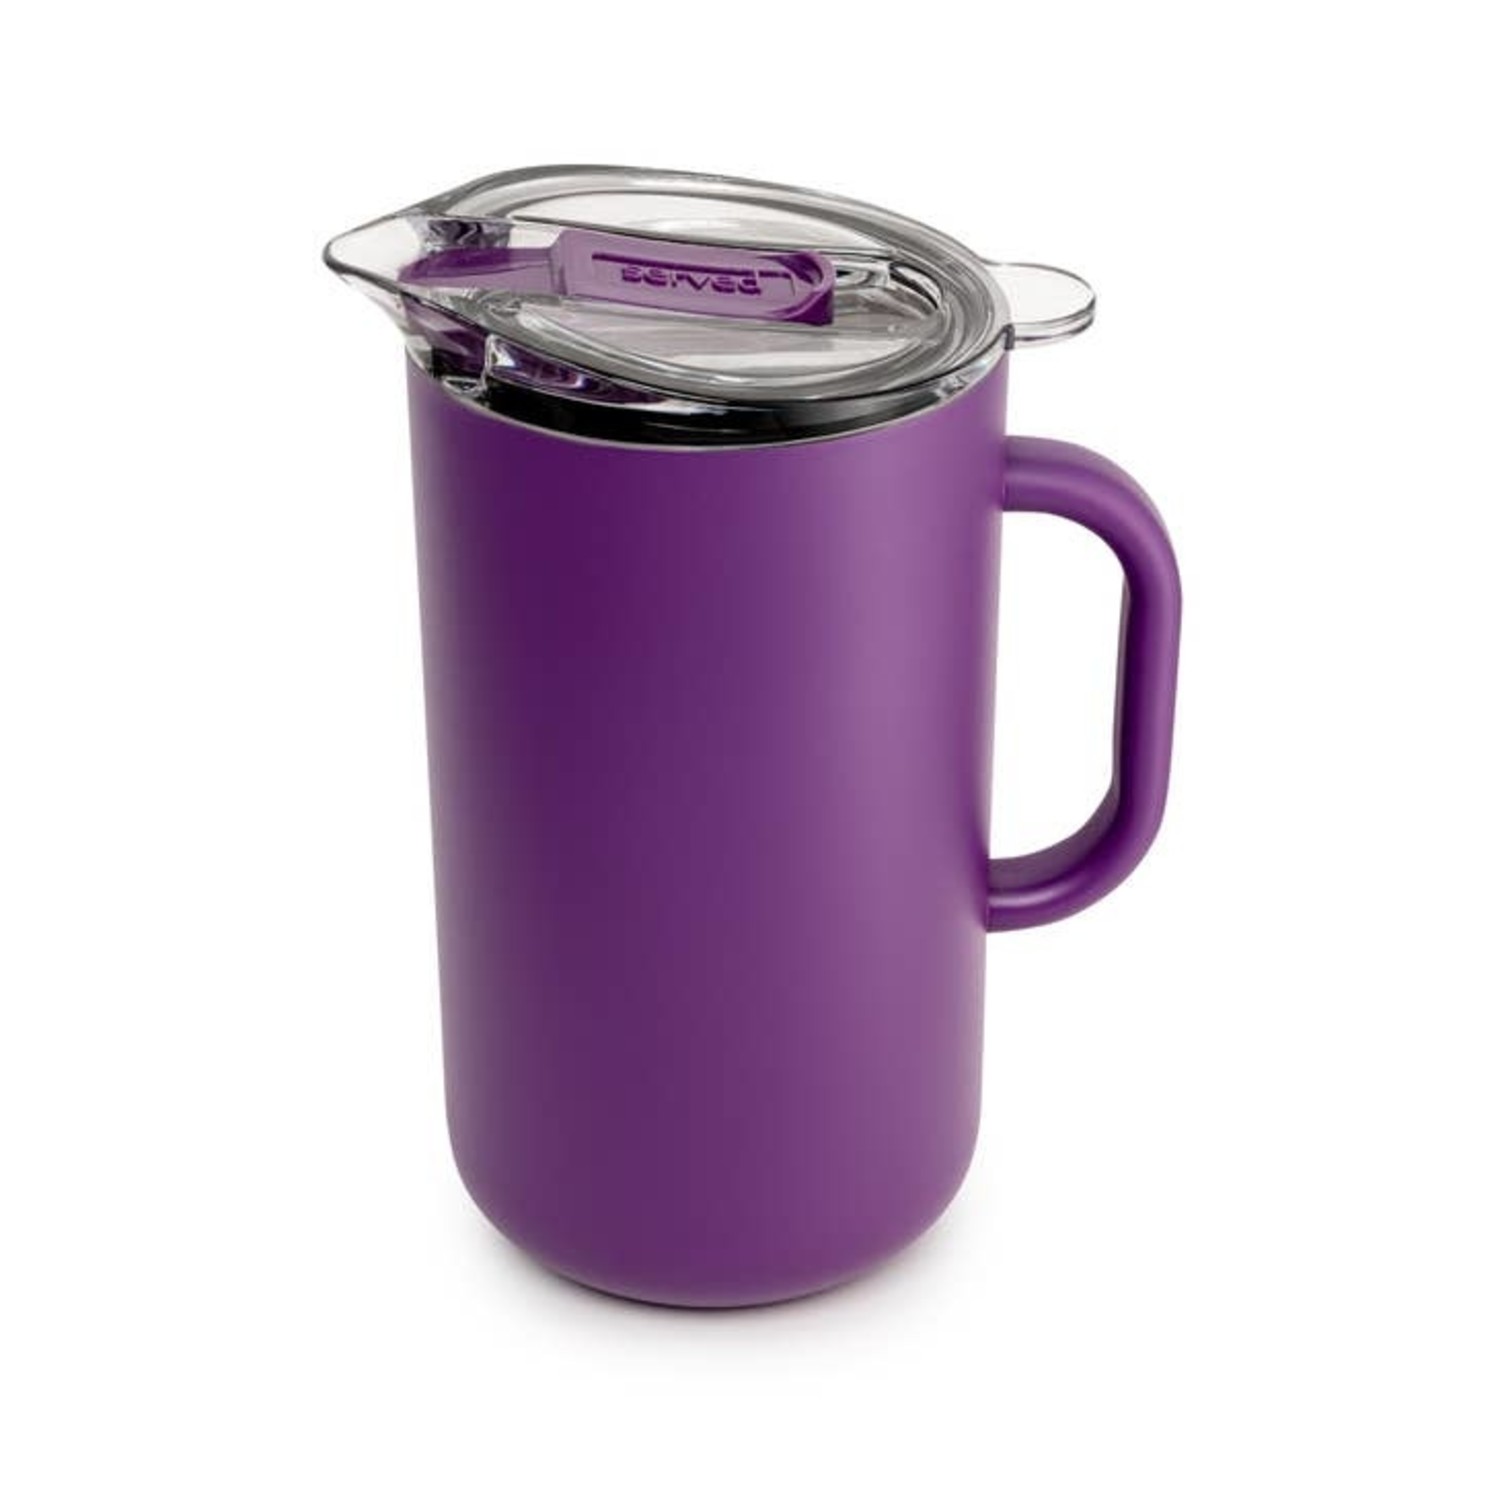 Served 2L_Pitcher served Brand  Premium Pitcher (2L) - Keep Drinks Cold or  Hot for Hours with our Vacuum-Insulated, Double-Walled, Copper-Lined